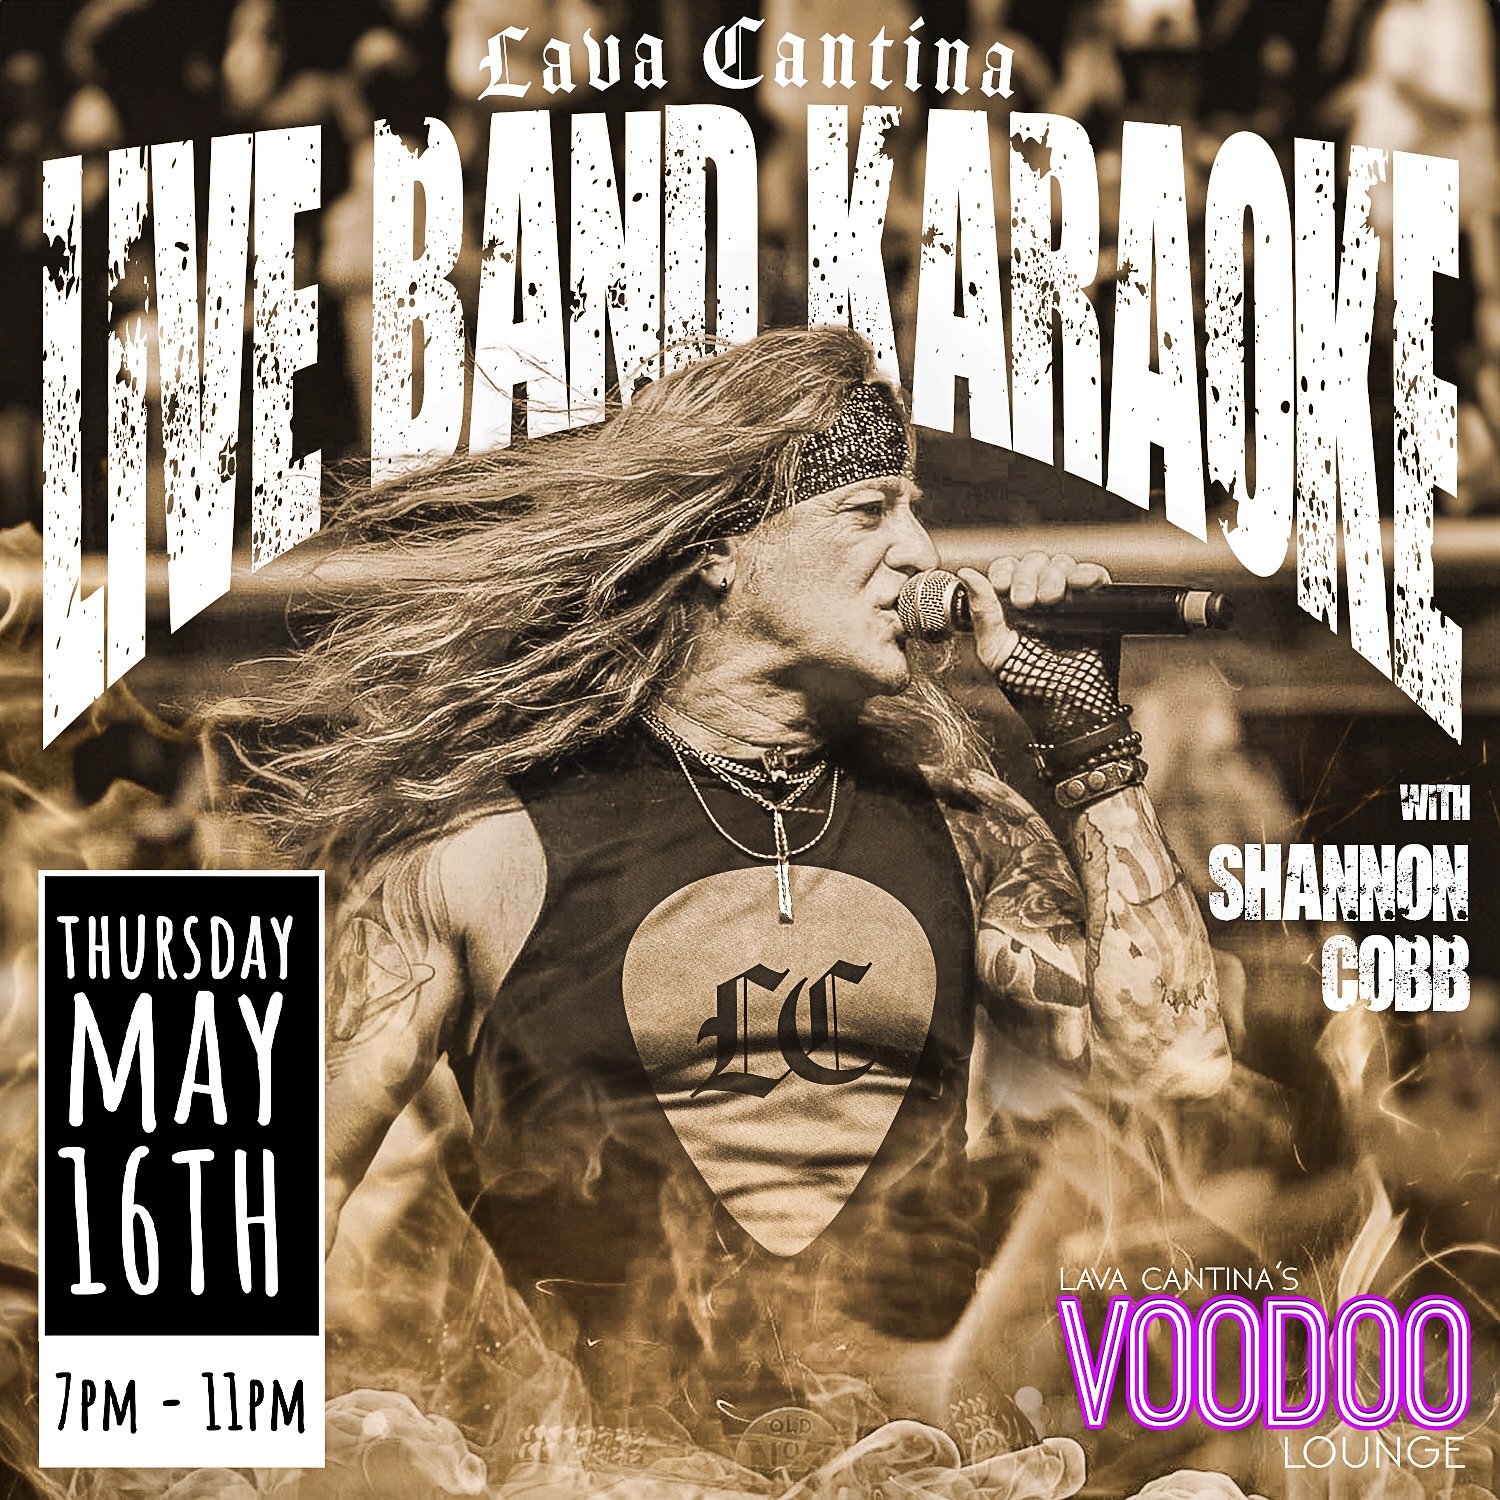 🎸🎤Live Band Karaoke with @shannoncobbmusic - Thursday, May 16th from 7pm - 11pm in Lava Cantina&rsquo;s Voodoo Lounge @lavacantinatc ! Happy Hour pricing, prizes, giveaways and MORE!!!!🎤🎸

💥AGES: All Ages!💥
🎟️TICKETS: No Tickets Needed! FREE E